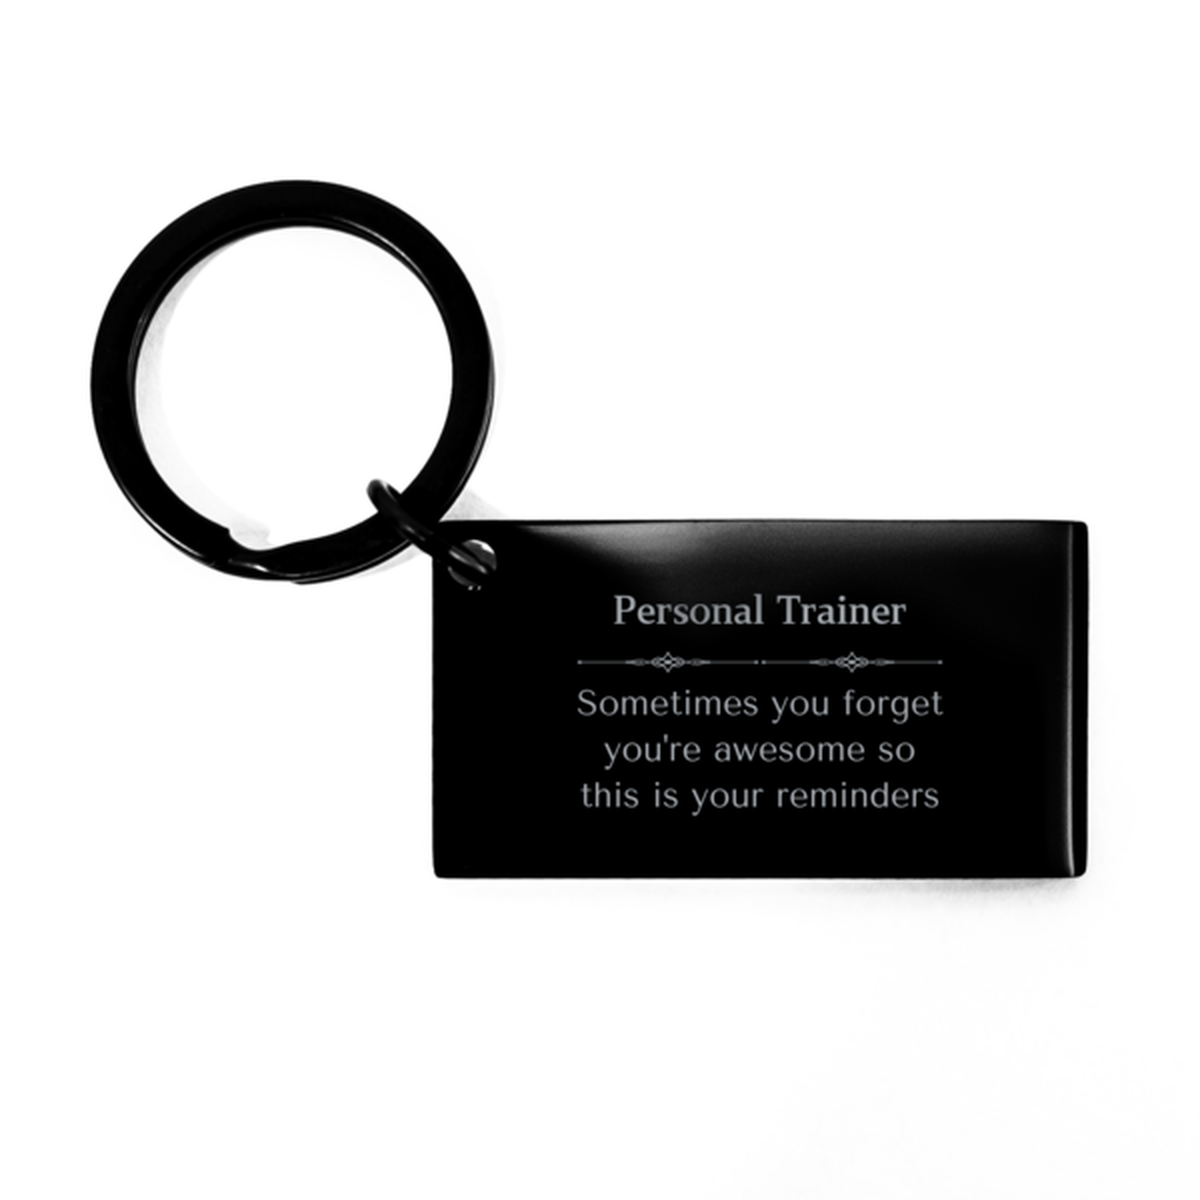 Sentimental Personal Trainer Keychain, Reporter Sometimes you forget you're awesome so this is your reminders, Graduation Christmas Birthday Gifts for Personal Trainer, Men, Women, Coworkers